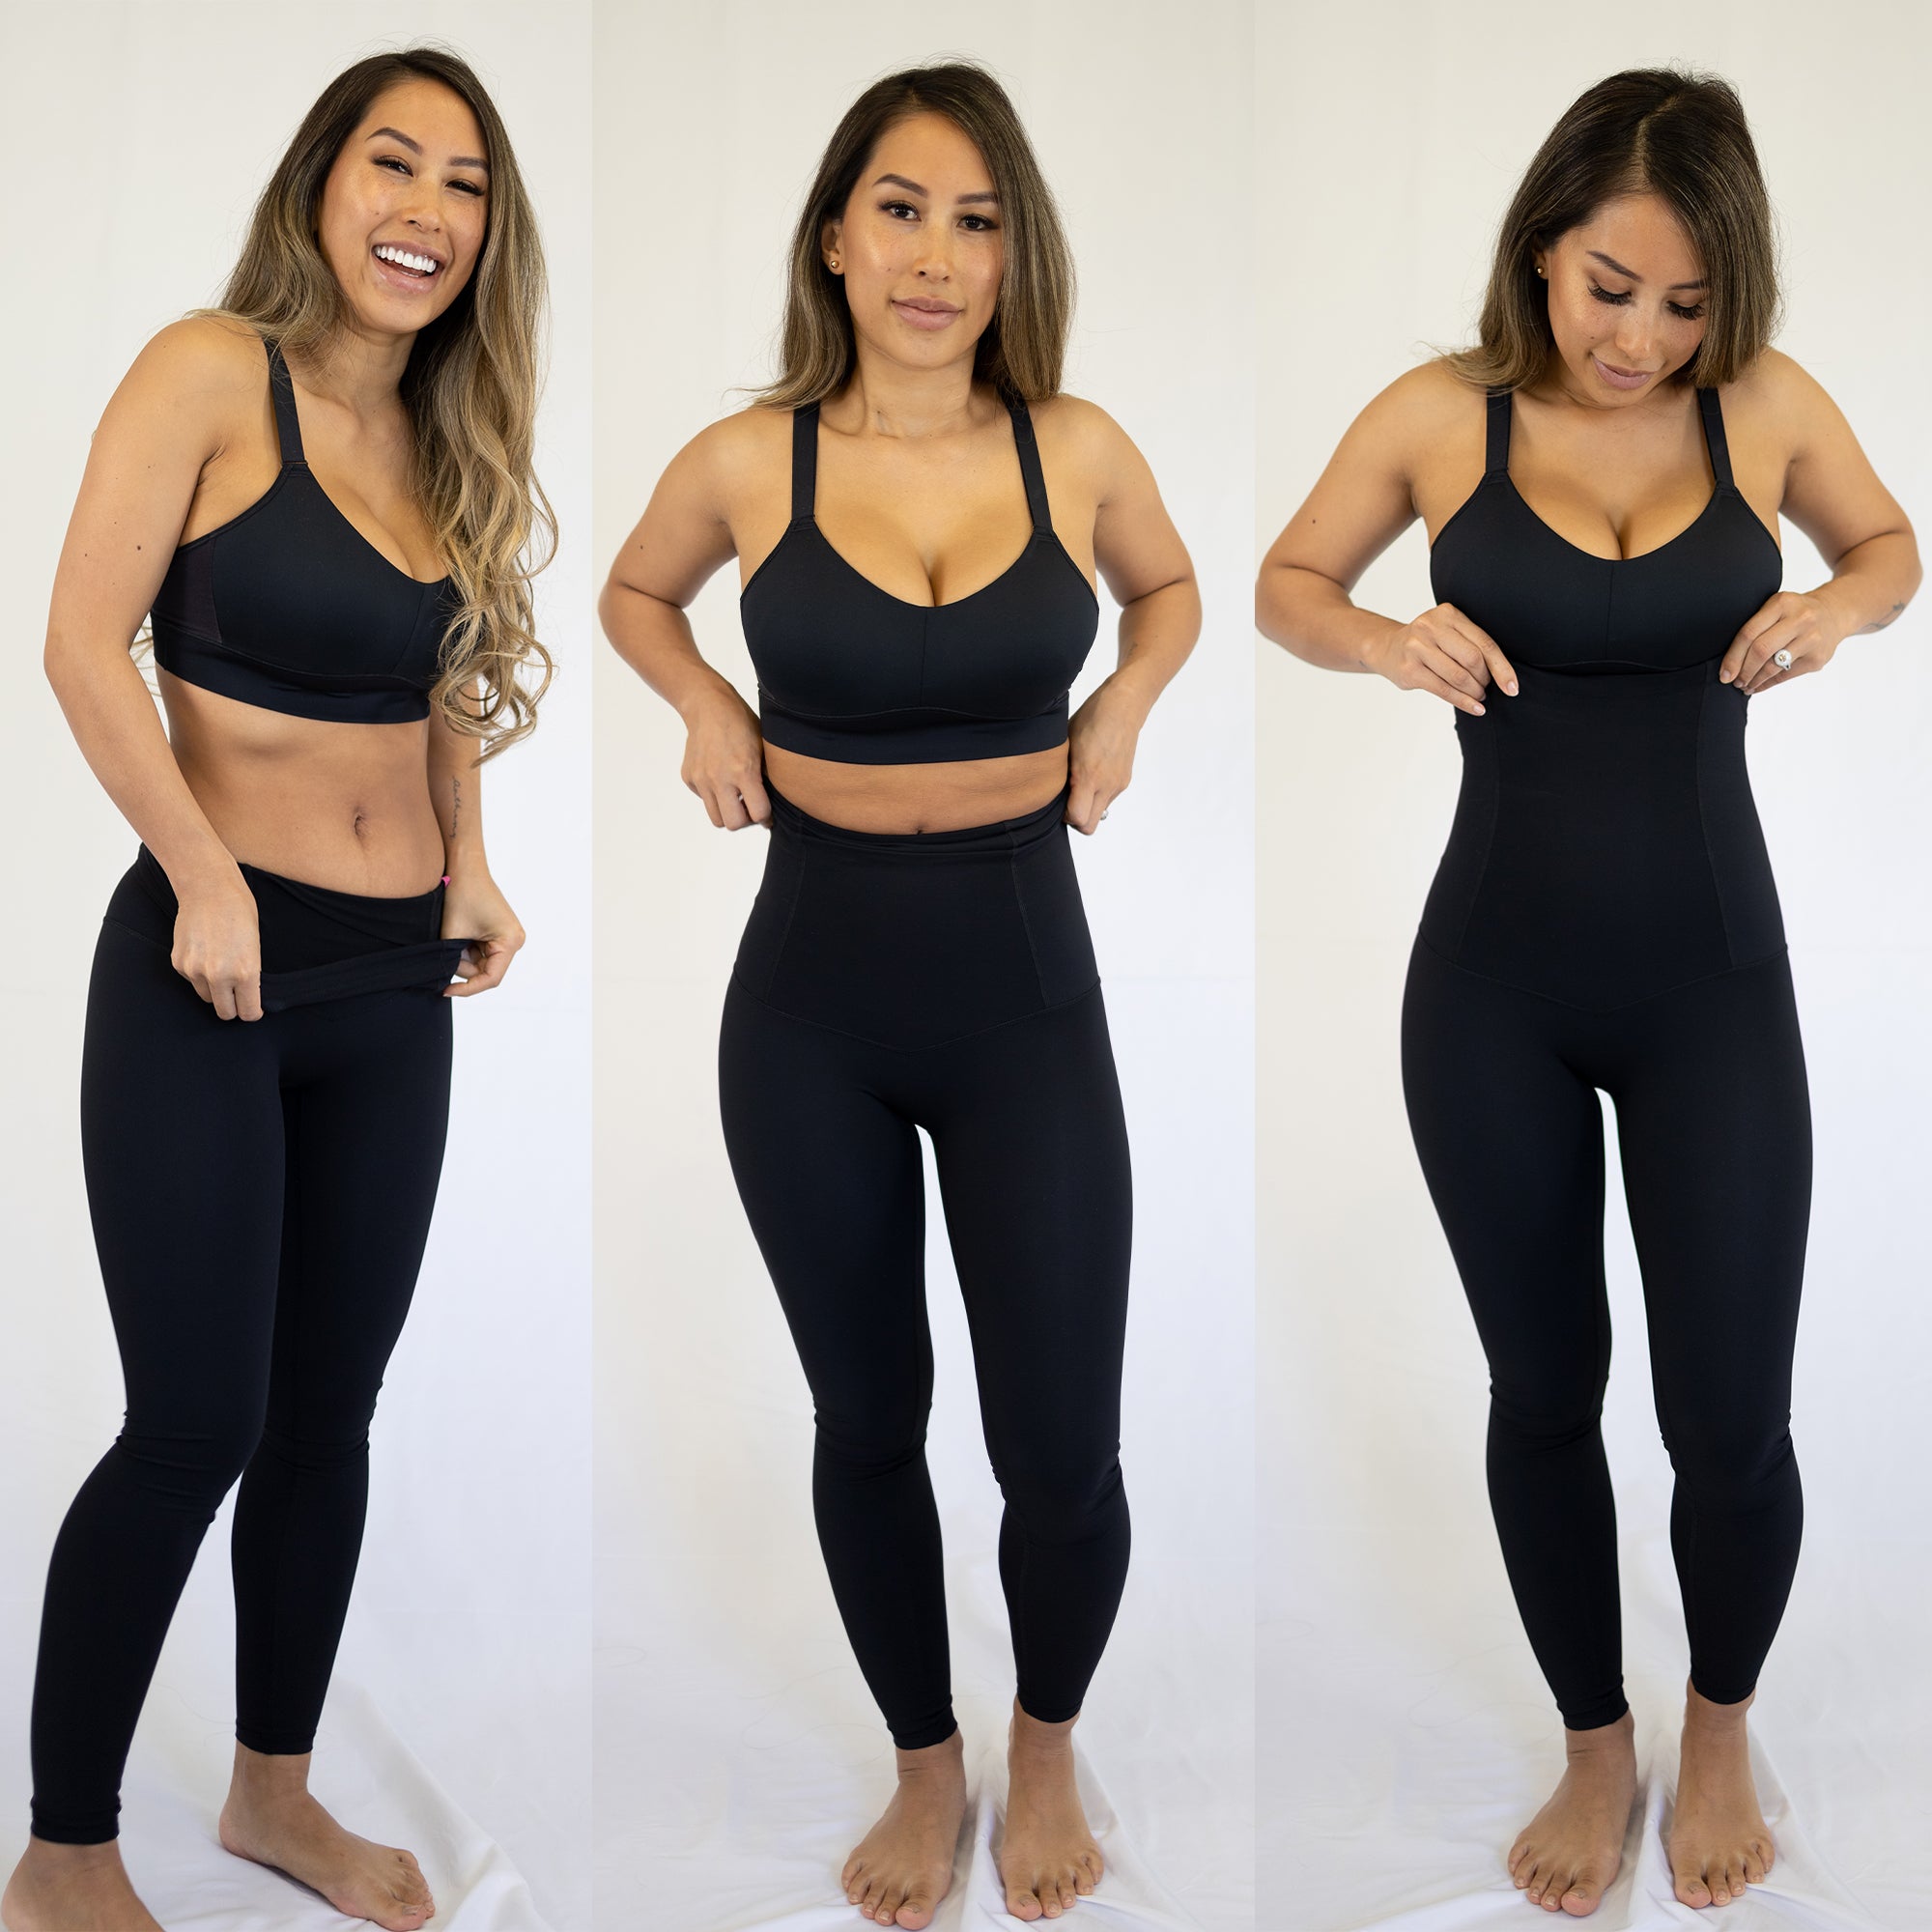 Check out these ultimate benefits of wearing shapewear like leggings during  yoga., Check out these ultimate benefits of wearing shapewear like  leggings during yoga. Website: www.twinbirds.co.in #womensdailywear  #flyeveryday #palazzo